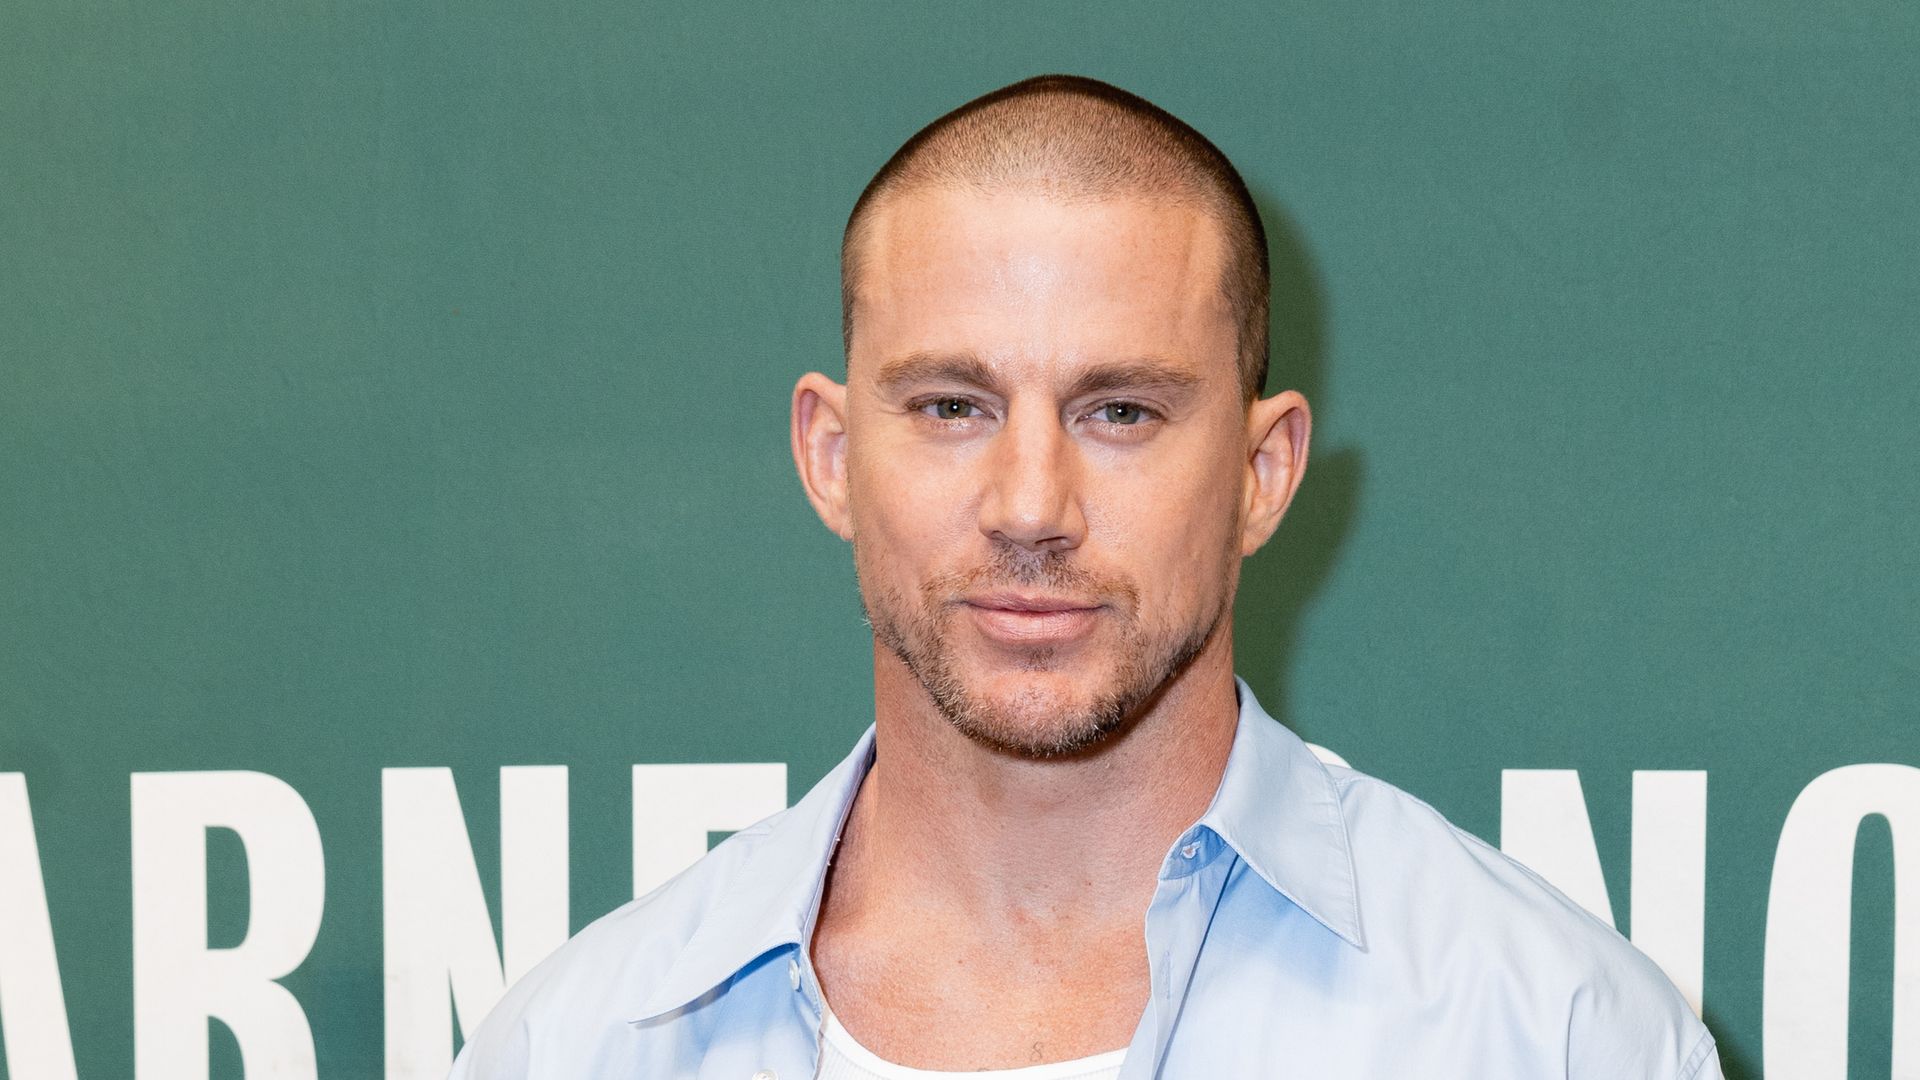 Channing Tatum poses for a photo before he signs copies of his new children's book "The One and Only Sparkella Makes A Plan" at Barnes & Noble at The Grove on June 01, 2022 in Los Angeles, California